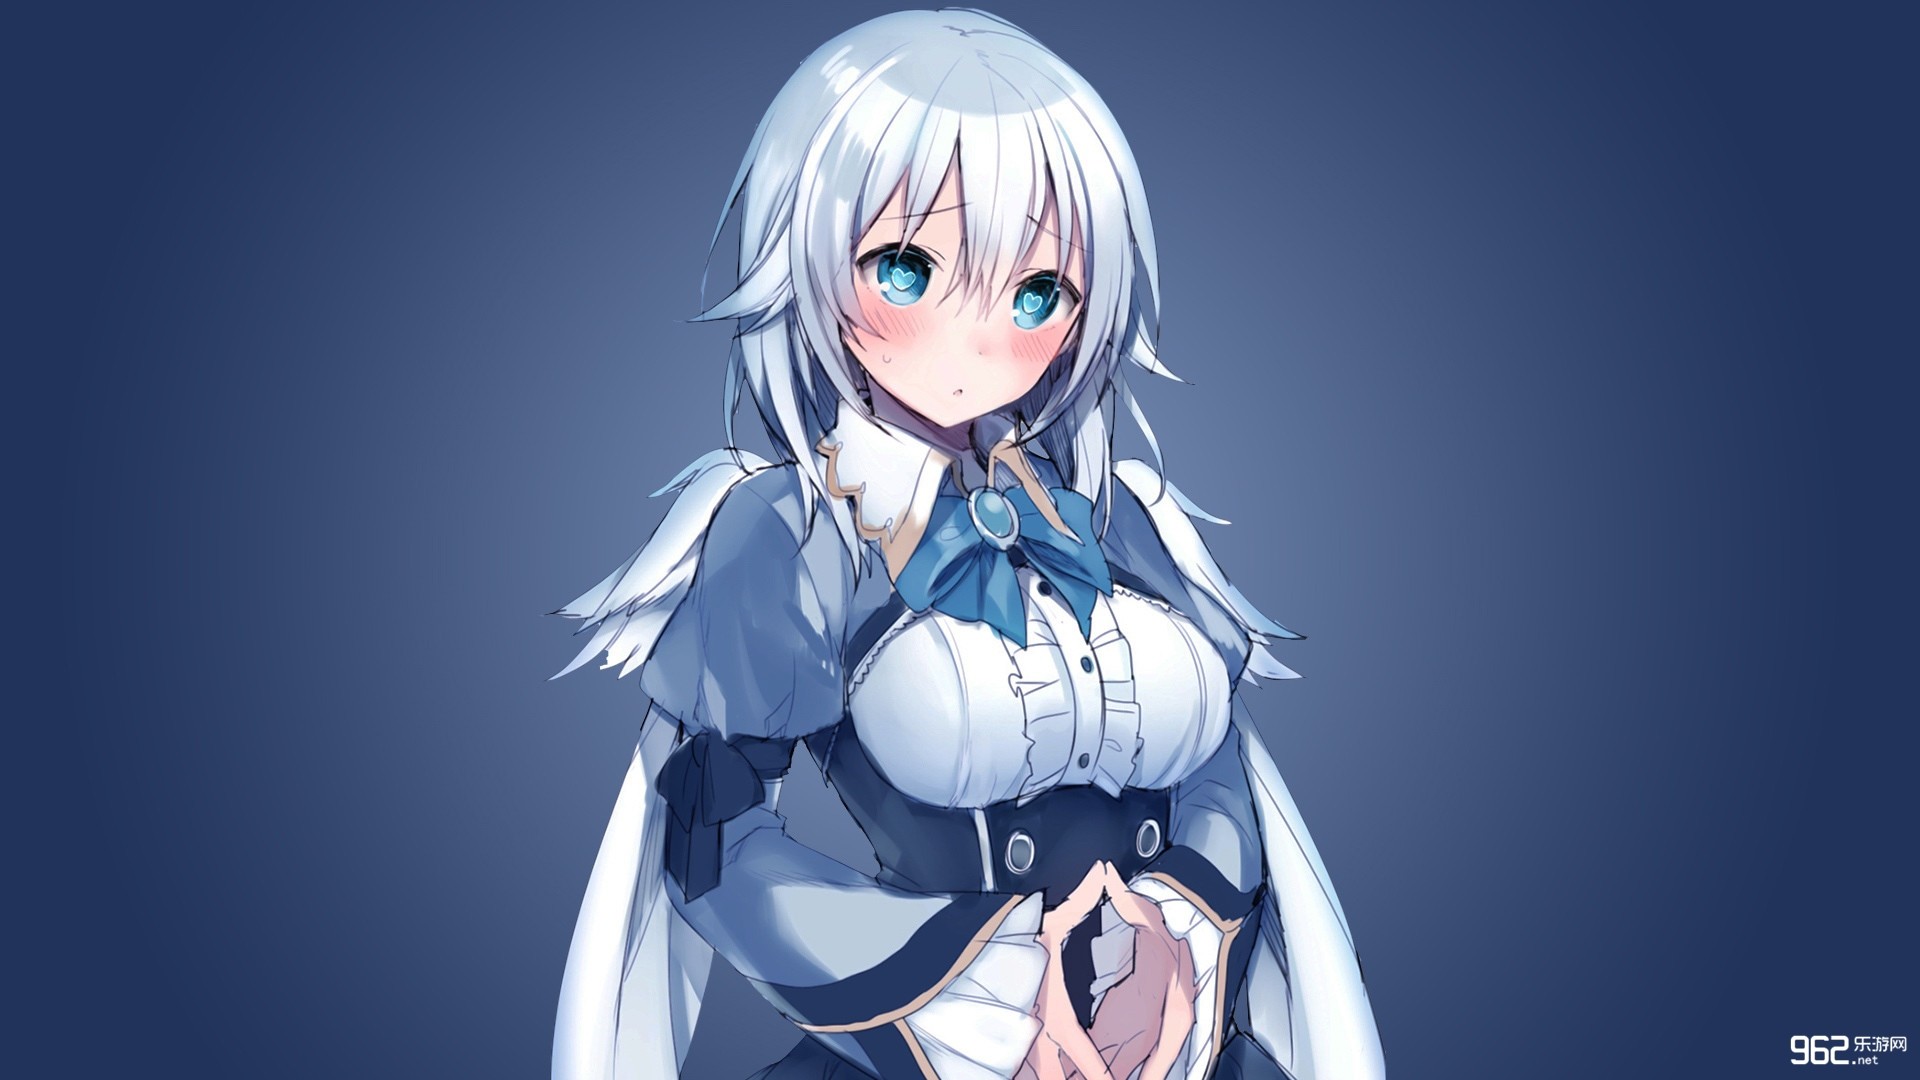 White Hair Anime Girl Picture